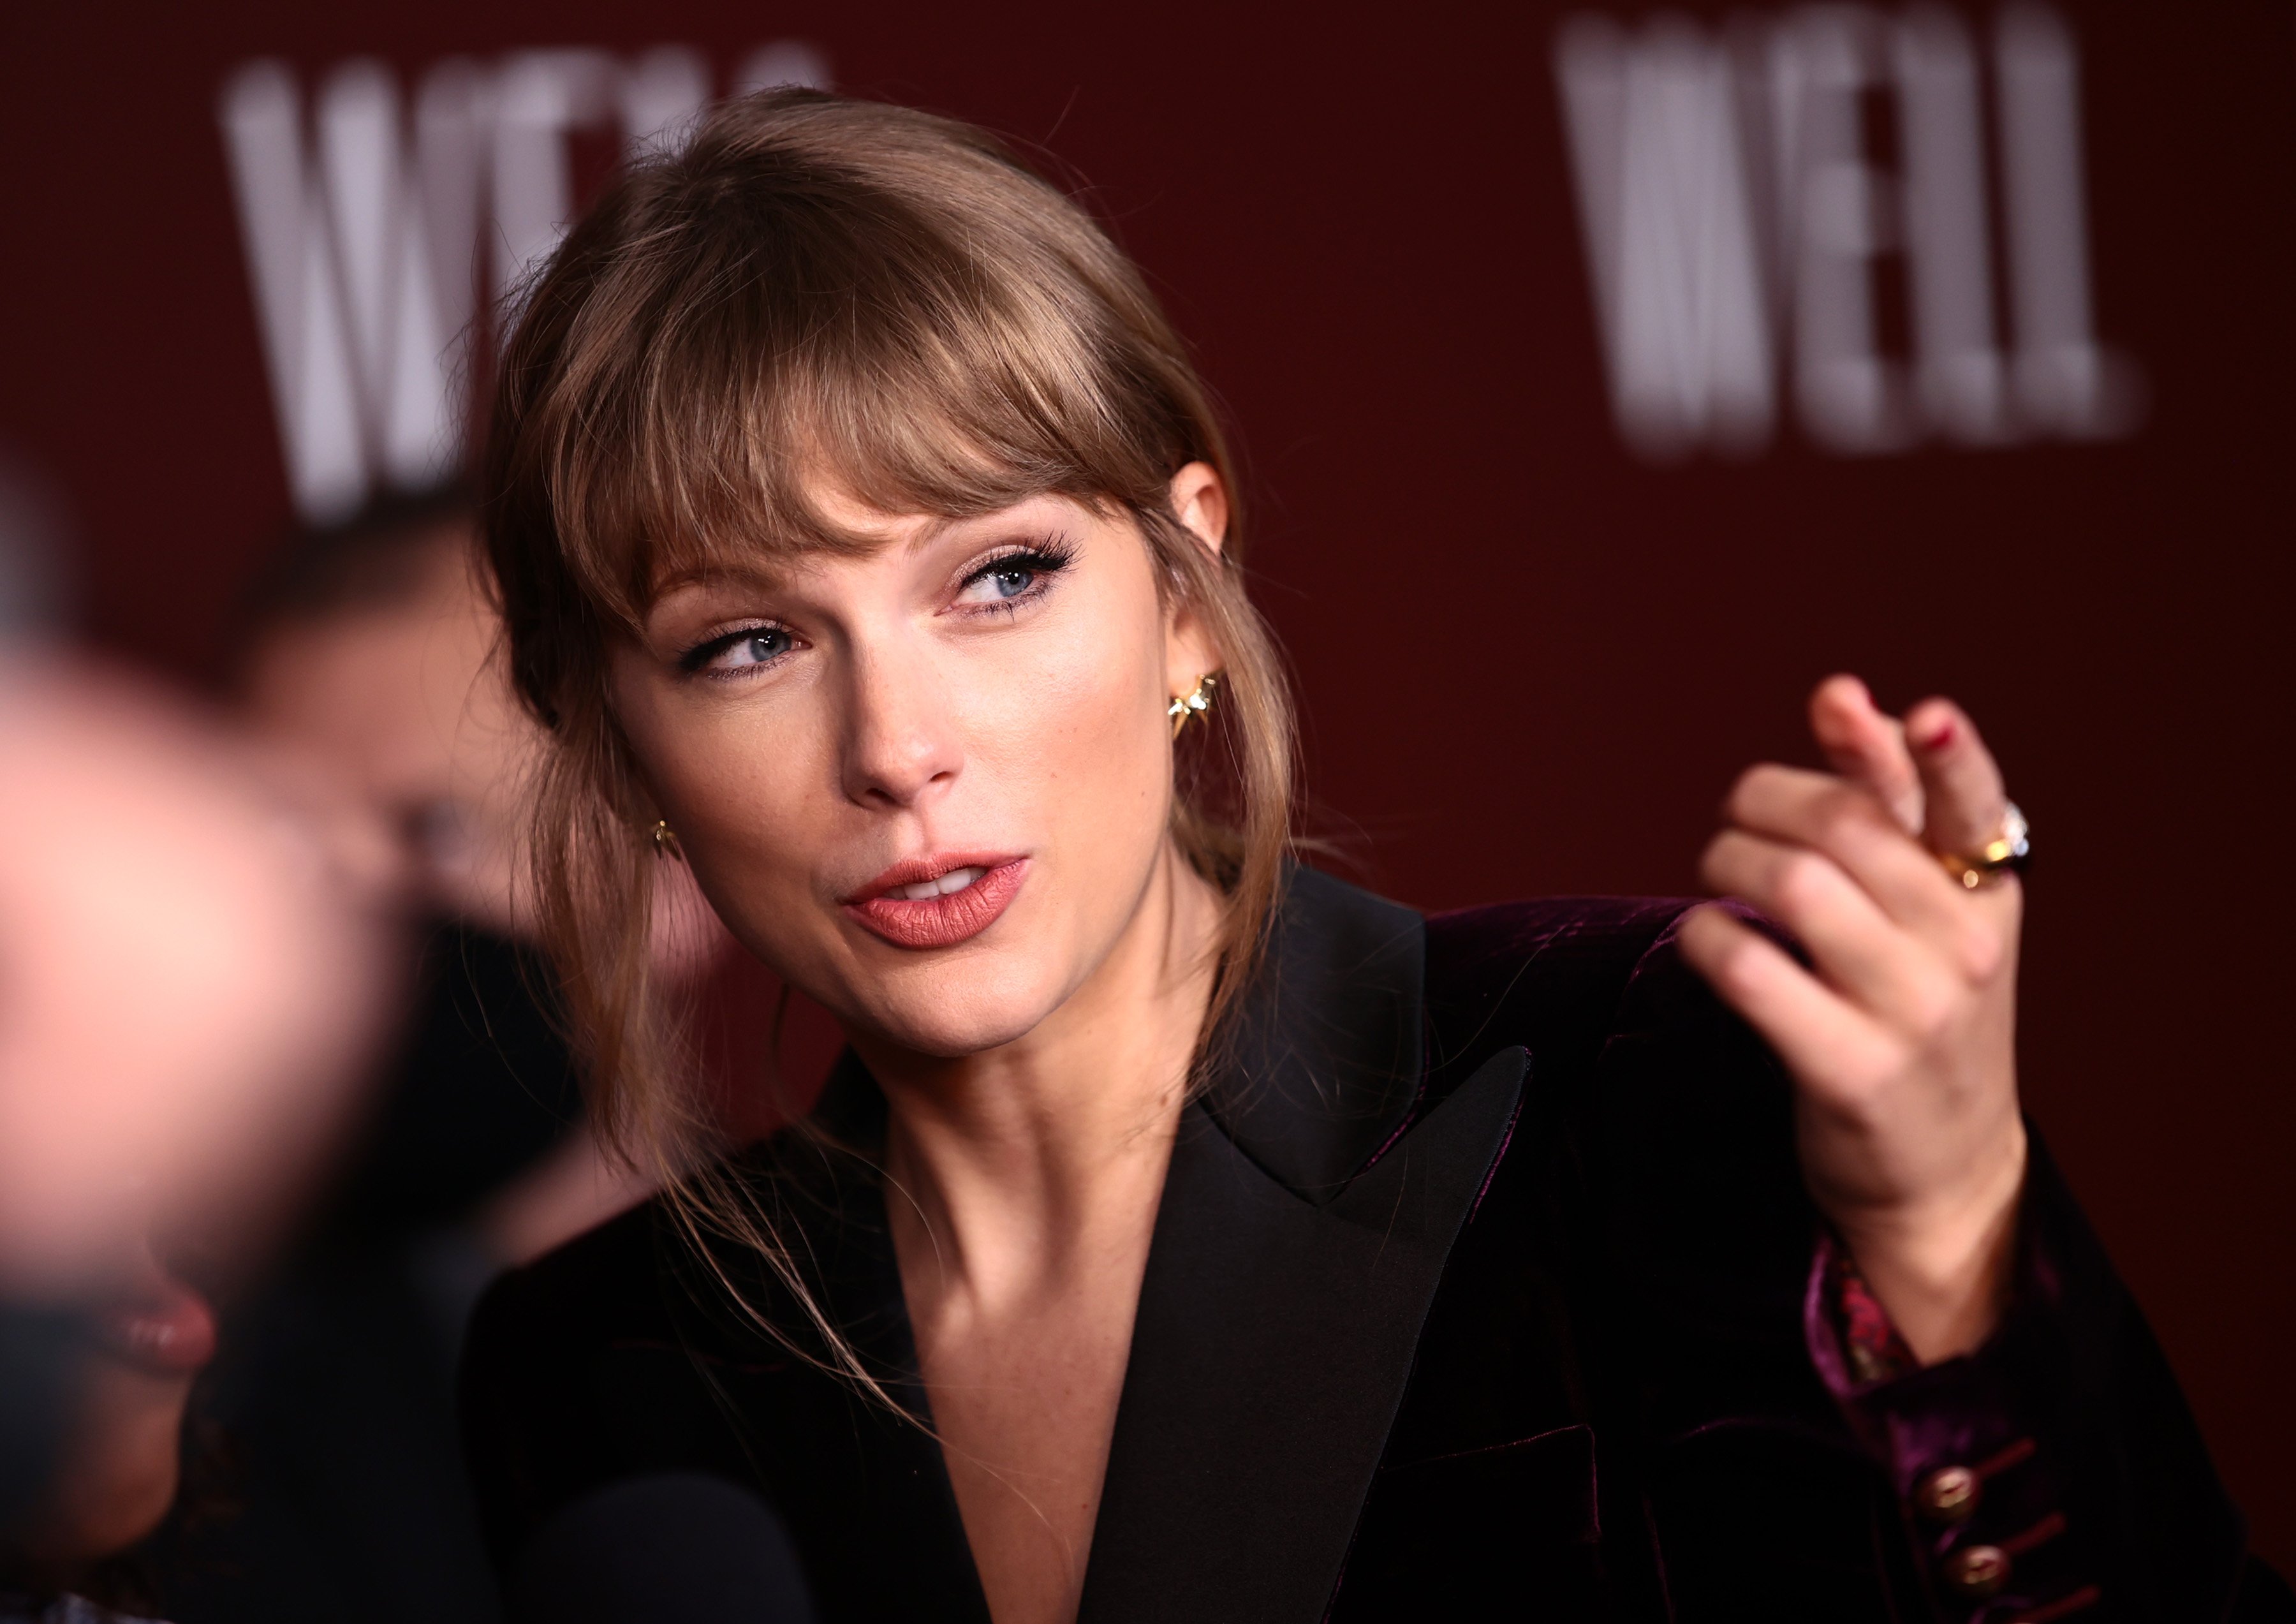 Taylor Swift attends the 'All Too Well' short film premiere in New York City